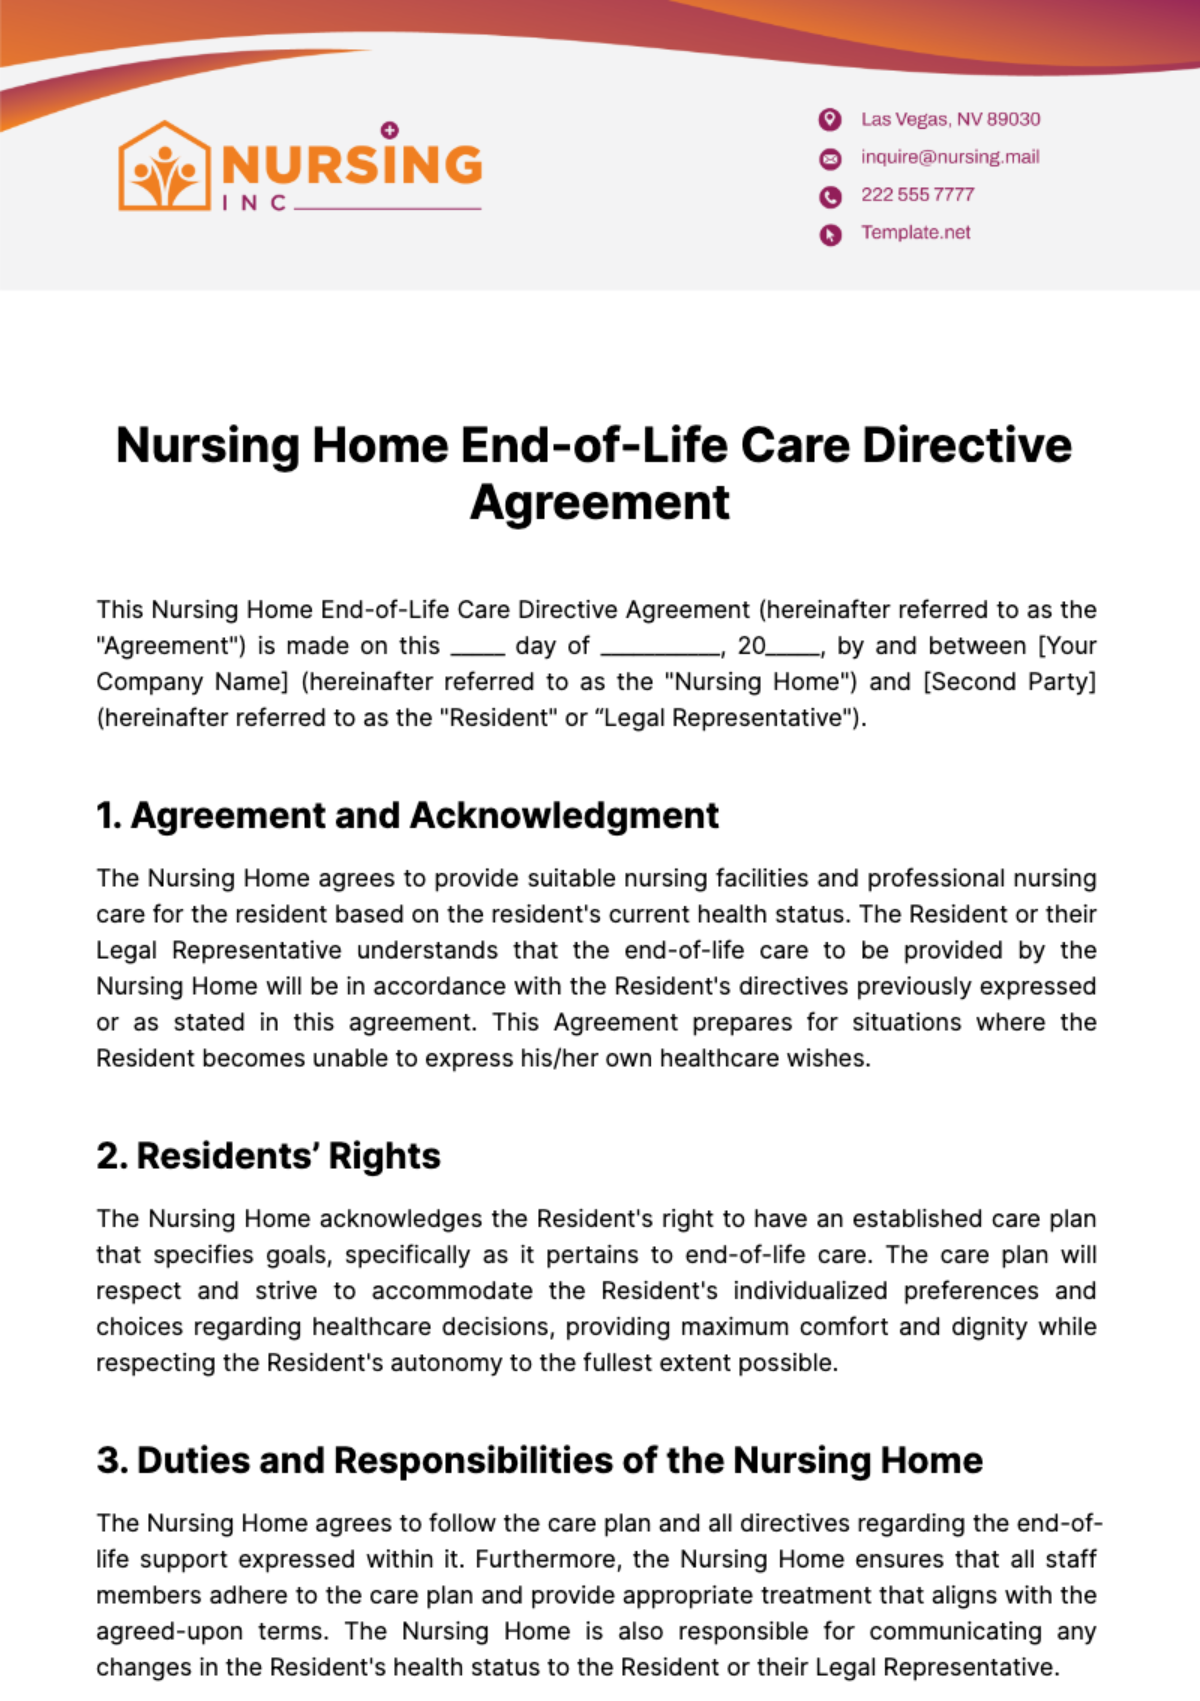 Nursing Home End-of-Life Care Directive Agreement Template